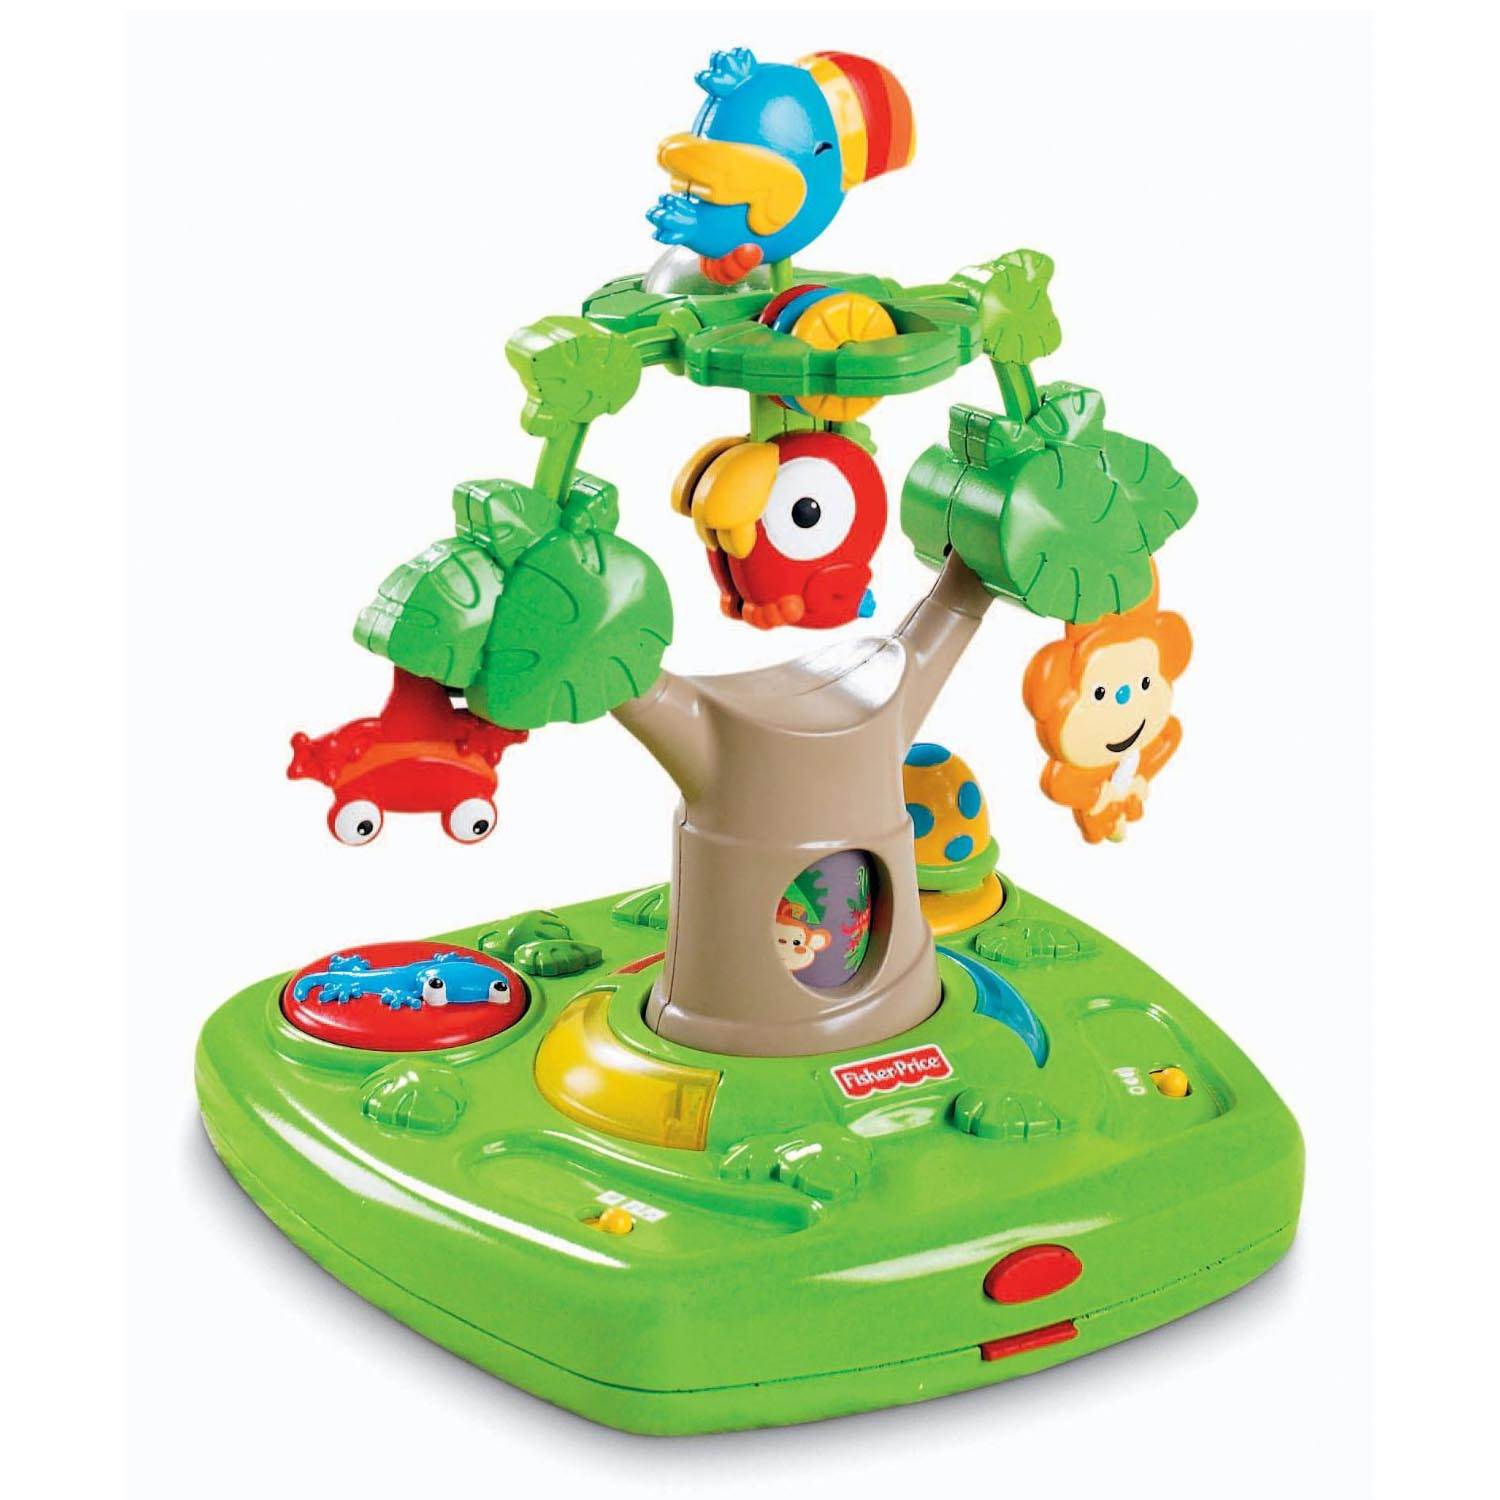 Fisher Price Rainforest Healthy Care High Chair with Dishwasher Safe Tray W3066 - image 3 of 5